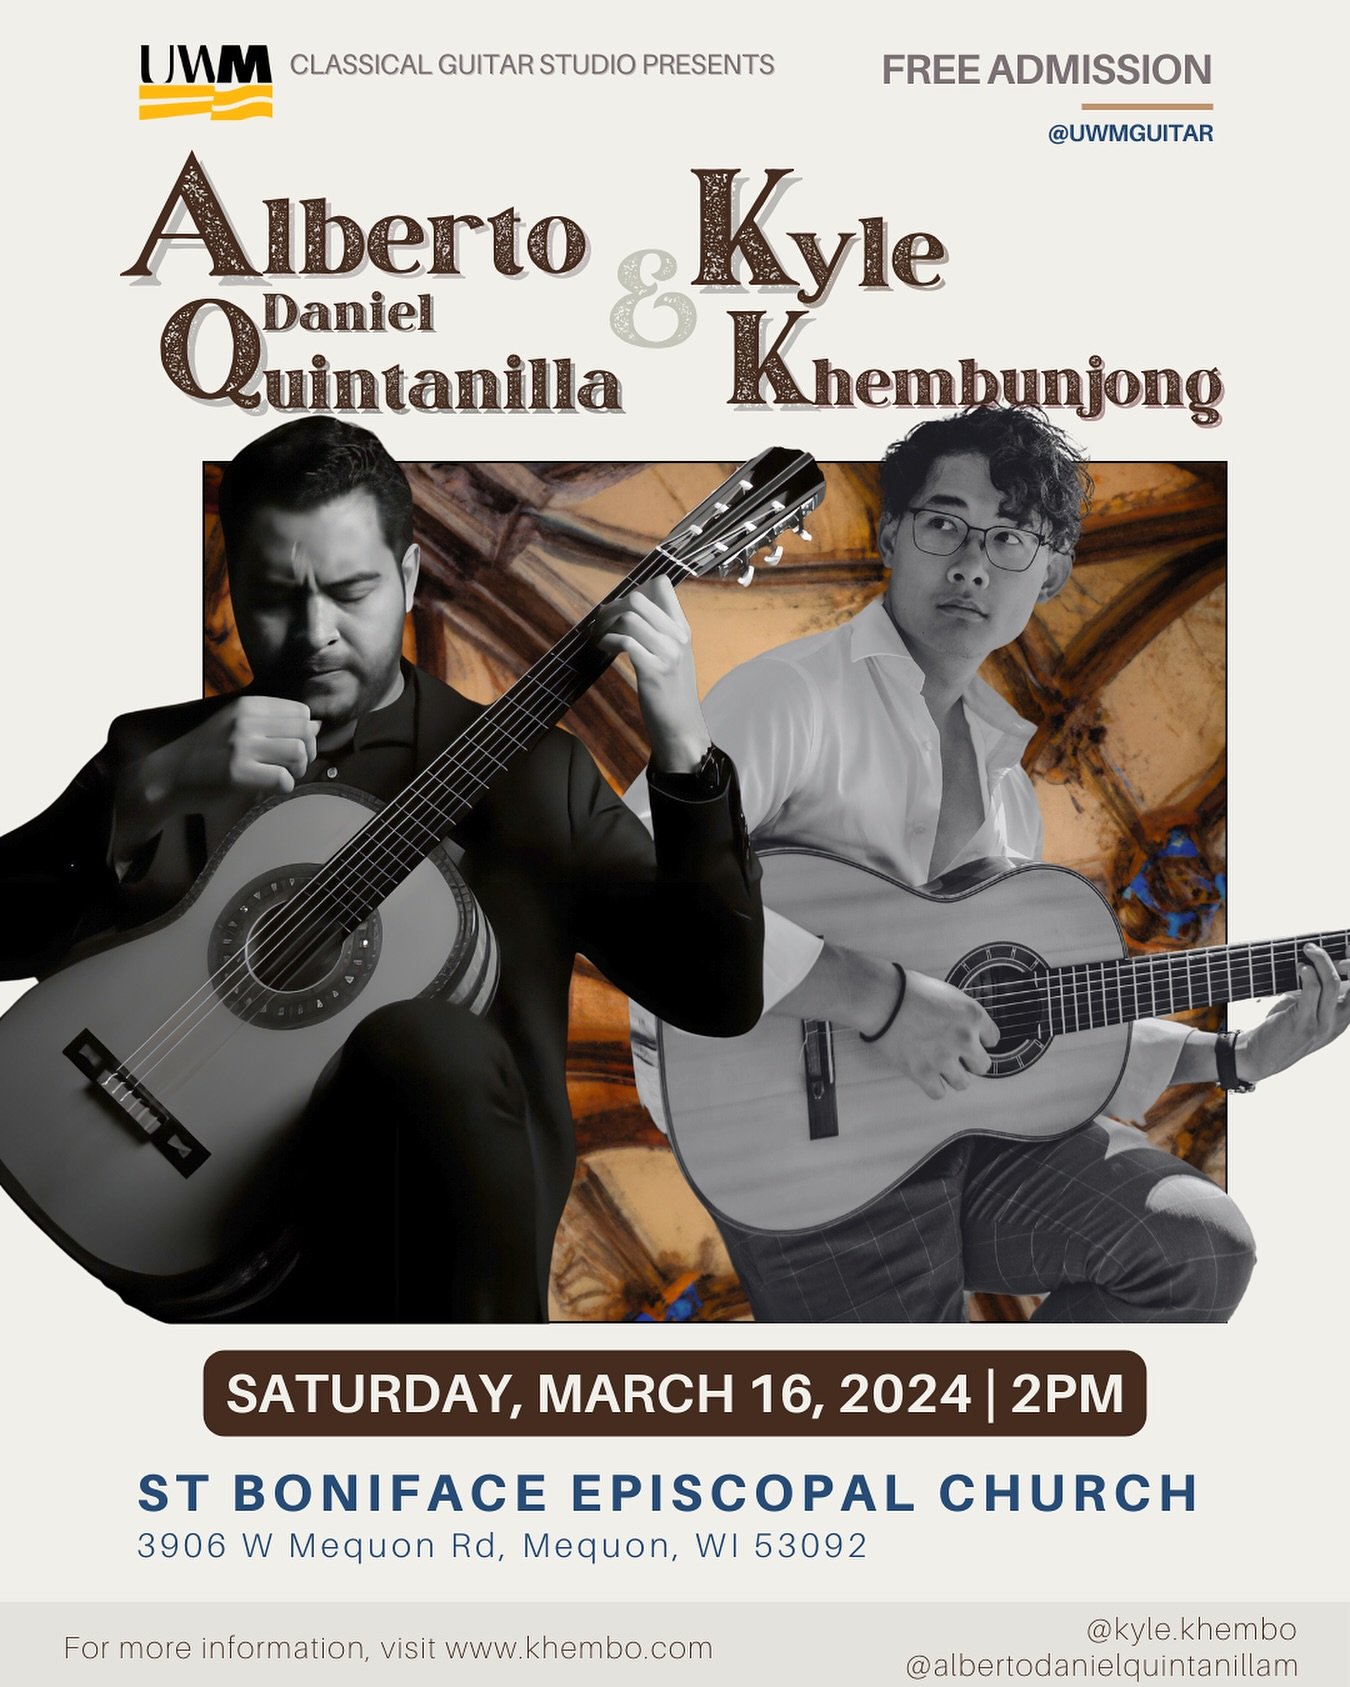 Hello friends of Milwaukee!! 👋 catch me and @albertodanielquintanillam for a shared guitar recital on March 16th at 2:00pm at the St. Boniface Episcopal Church! Super excited for this!!!
Hope to see you there!

.
.
.
.
#🎸 #classicalguitar #guitar #